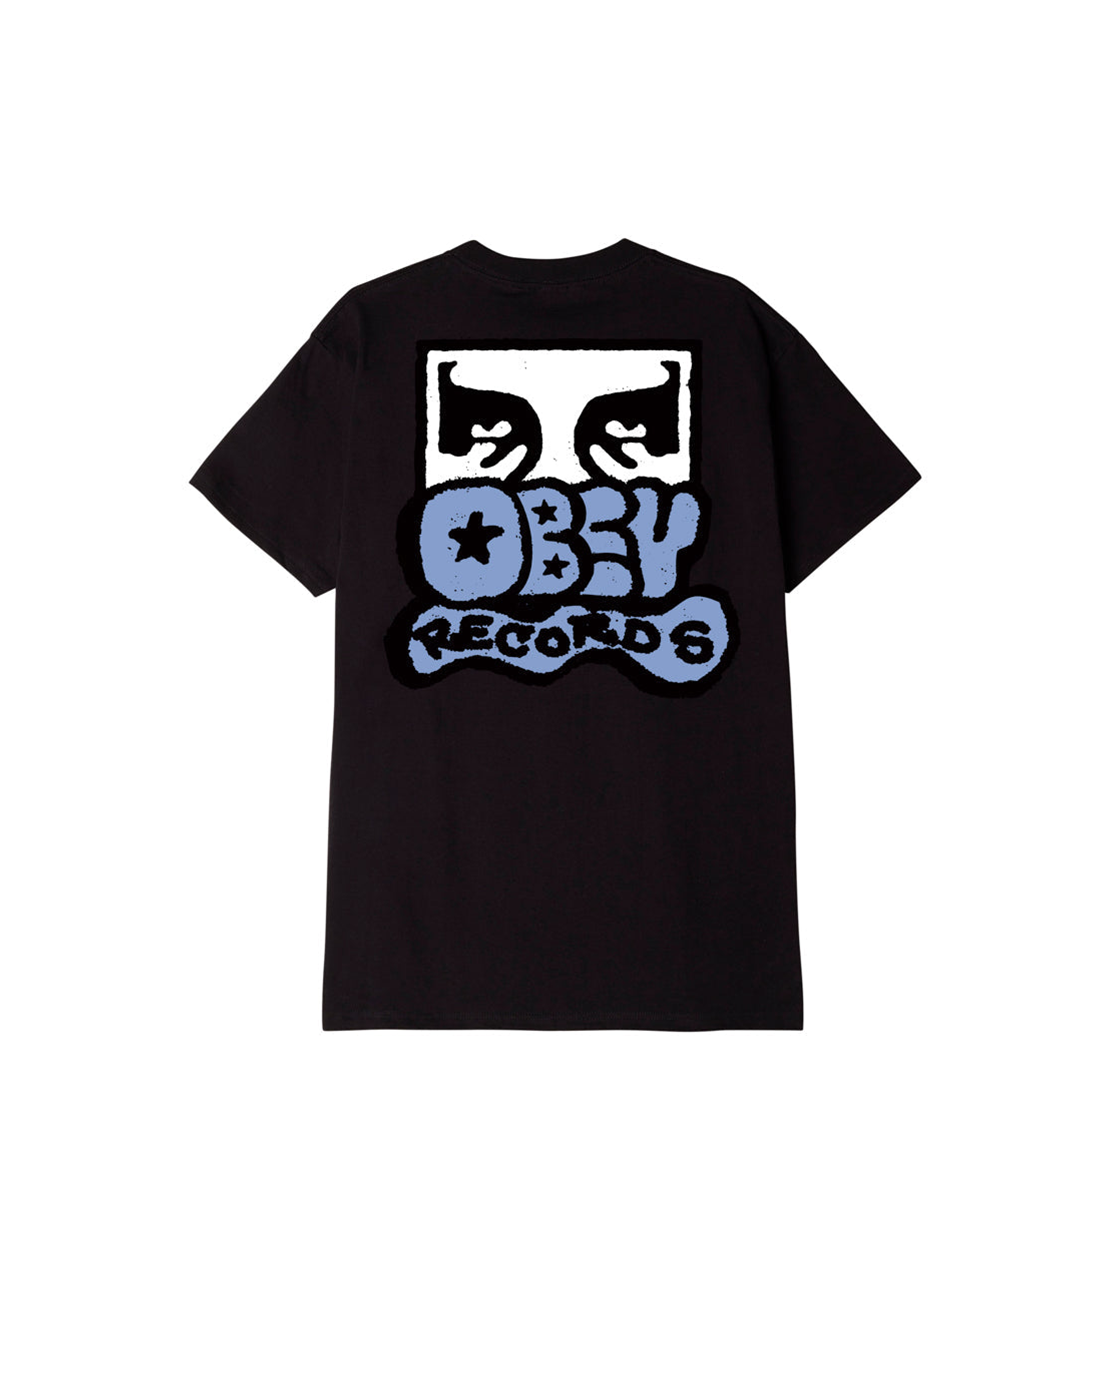 Obey Records